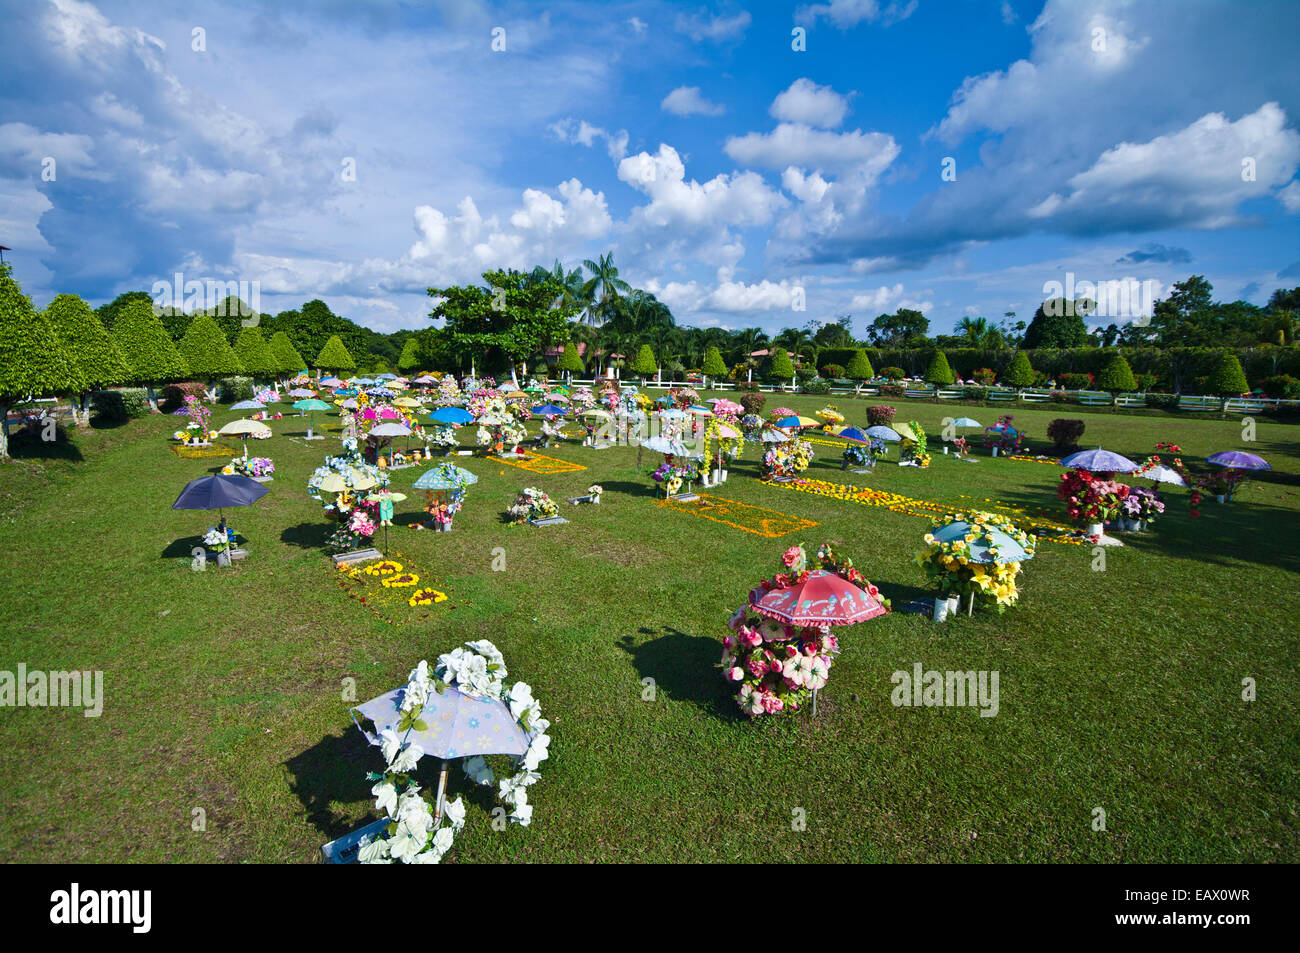 Colorful umbrellas, flower bouquets and wreaths shade pet graves in a cemetery. Stock Photo